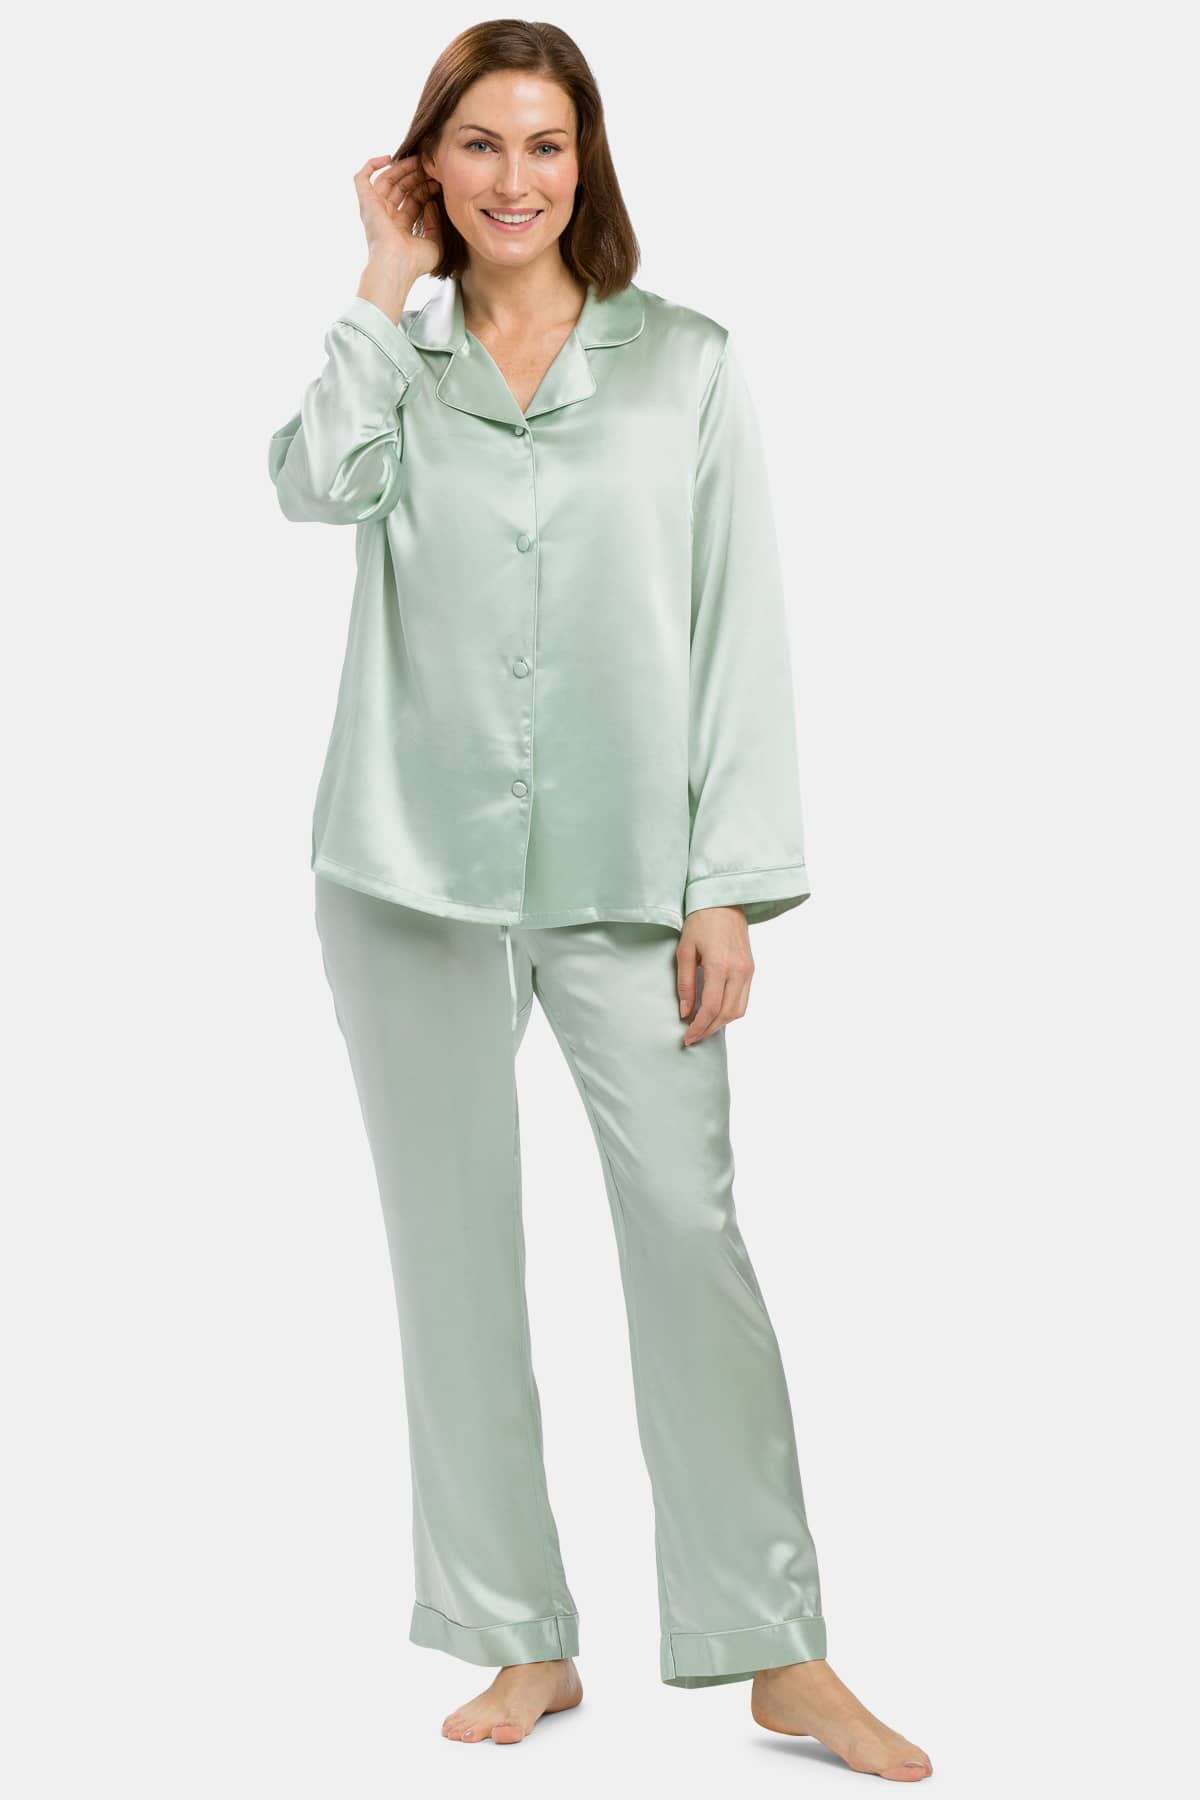 Stars Above Ivory Pajama Sets for Women